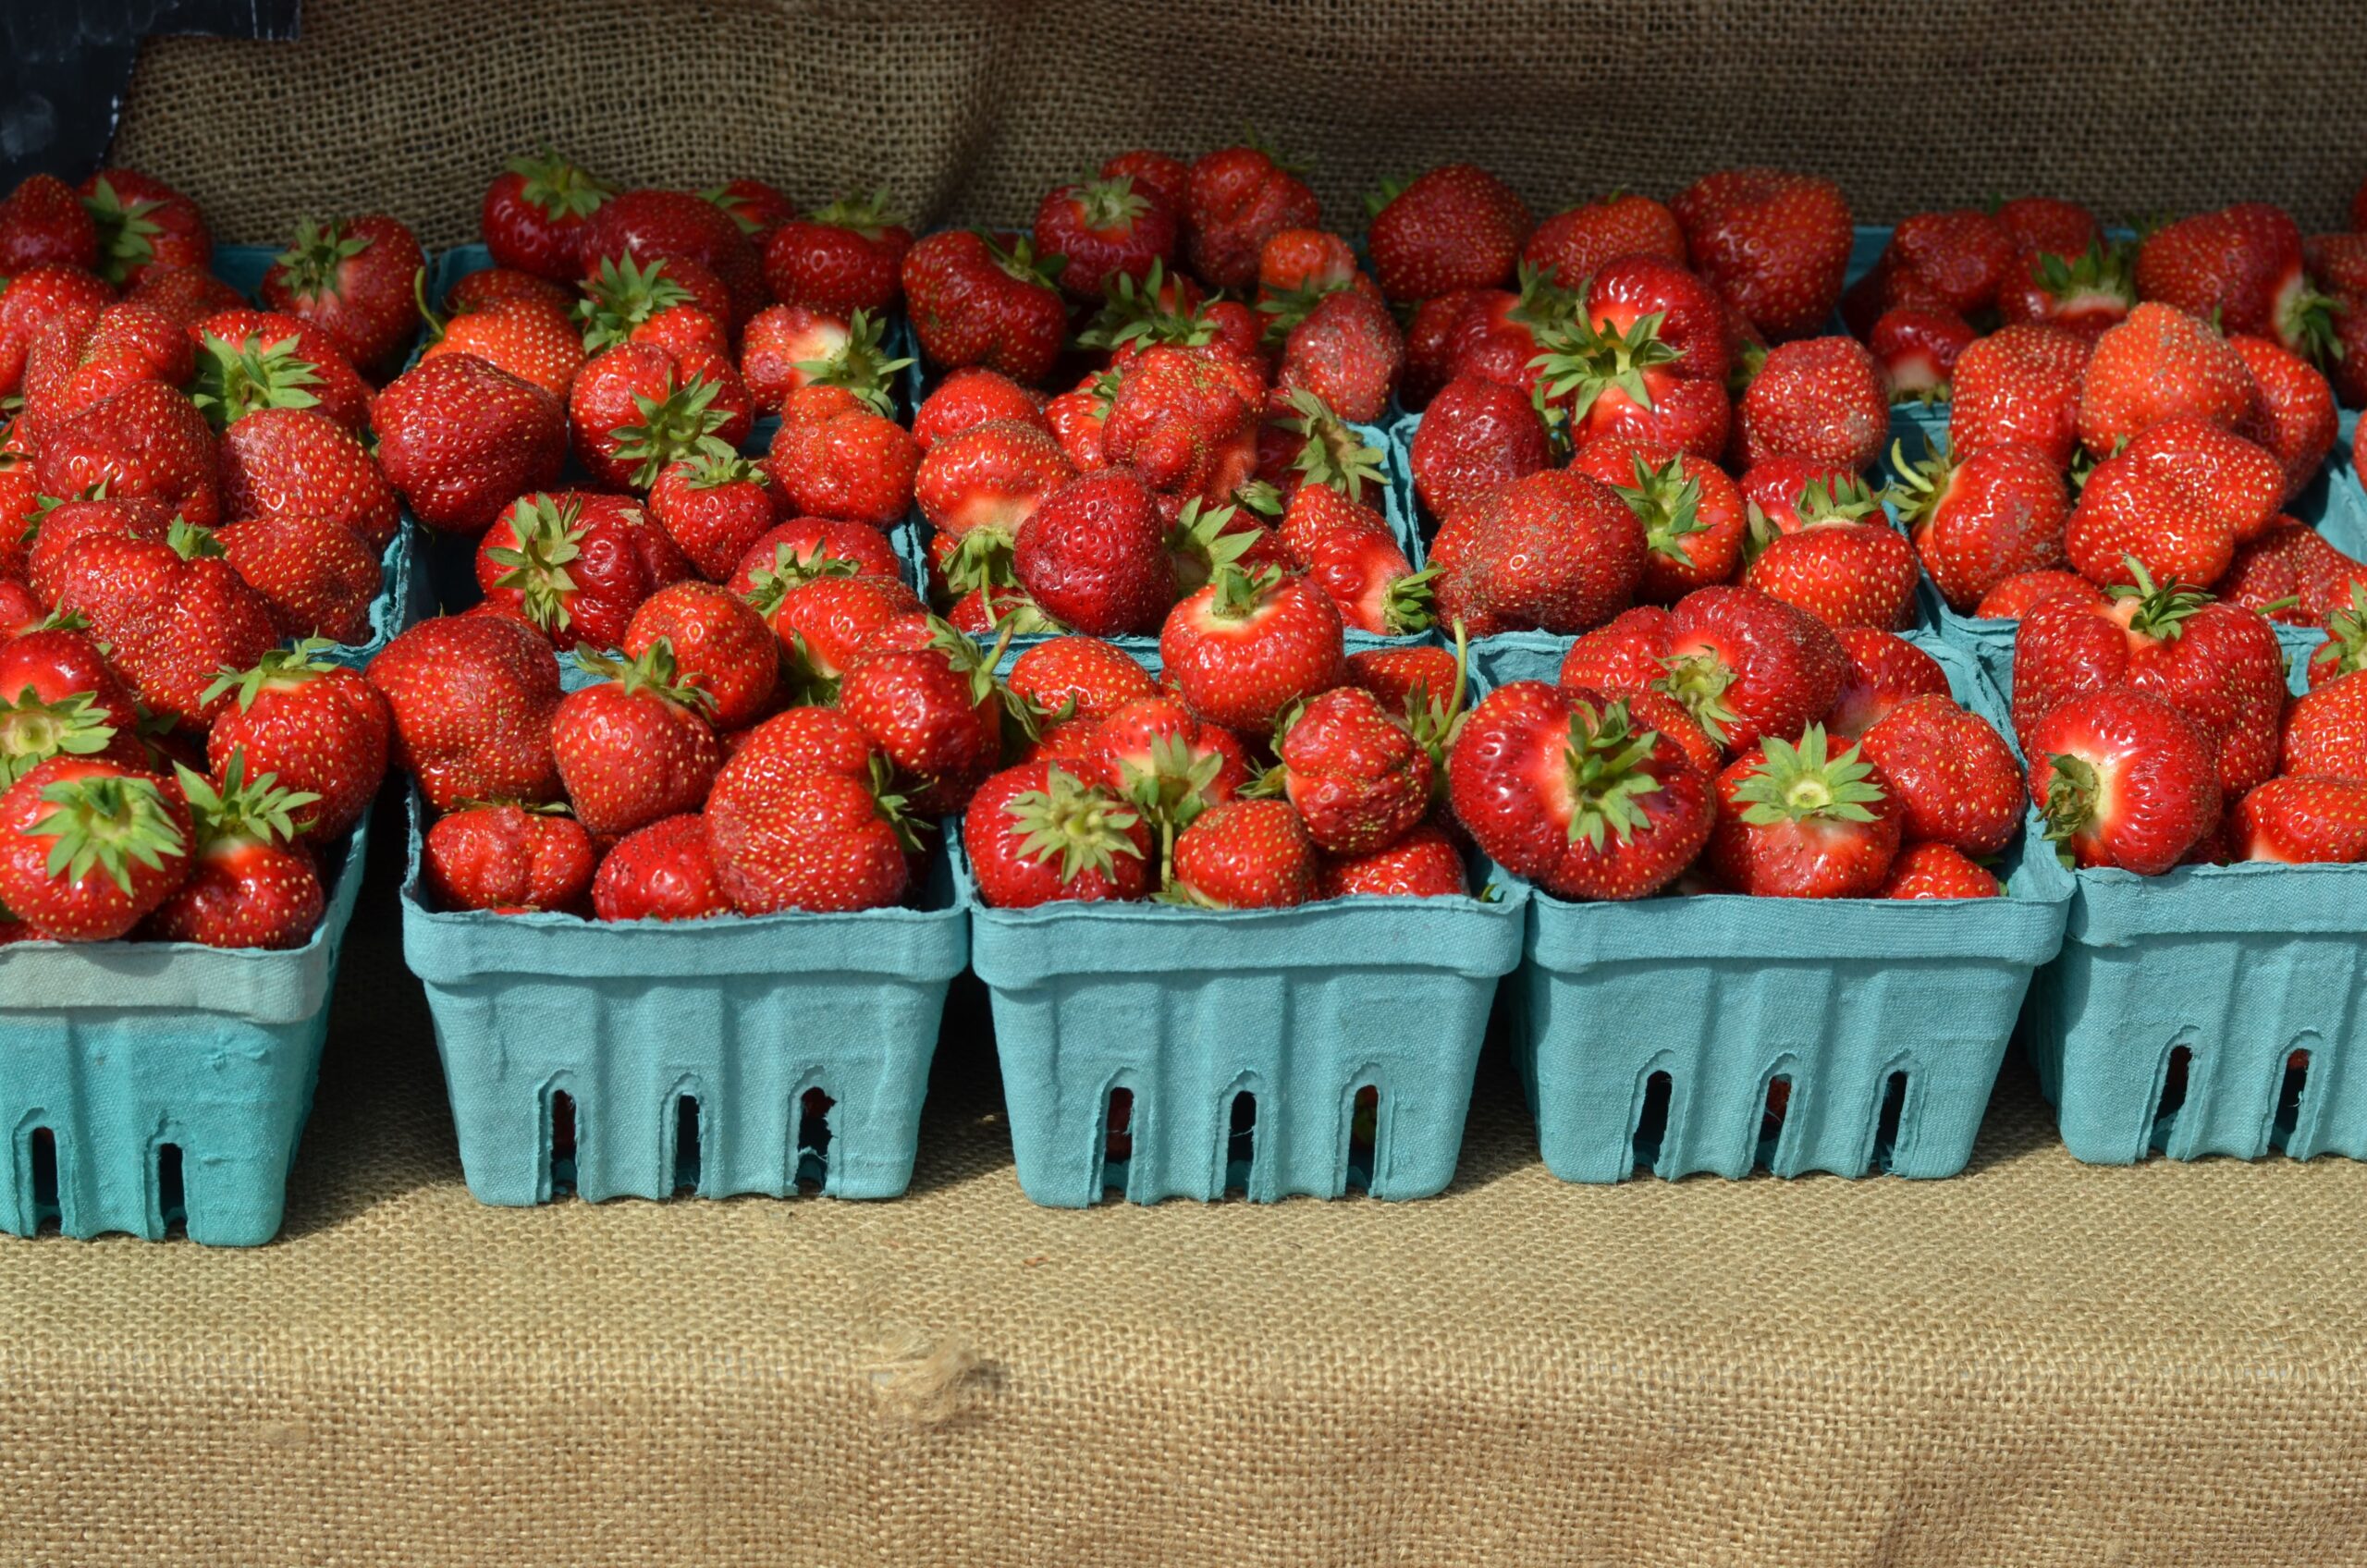 A table with cardboard baskets filled with bright red strawberries